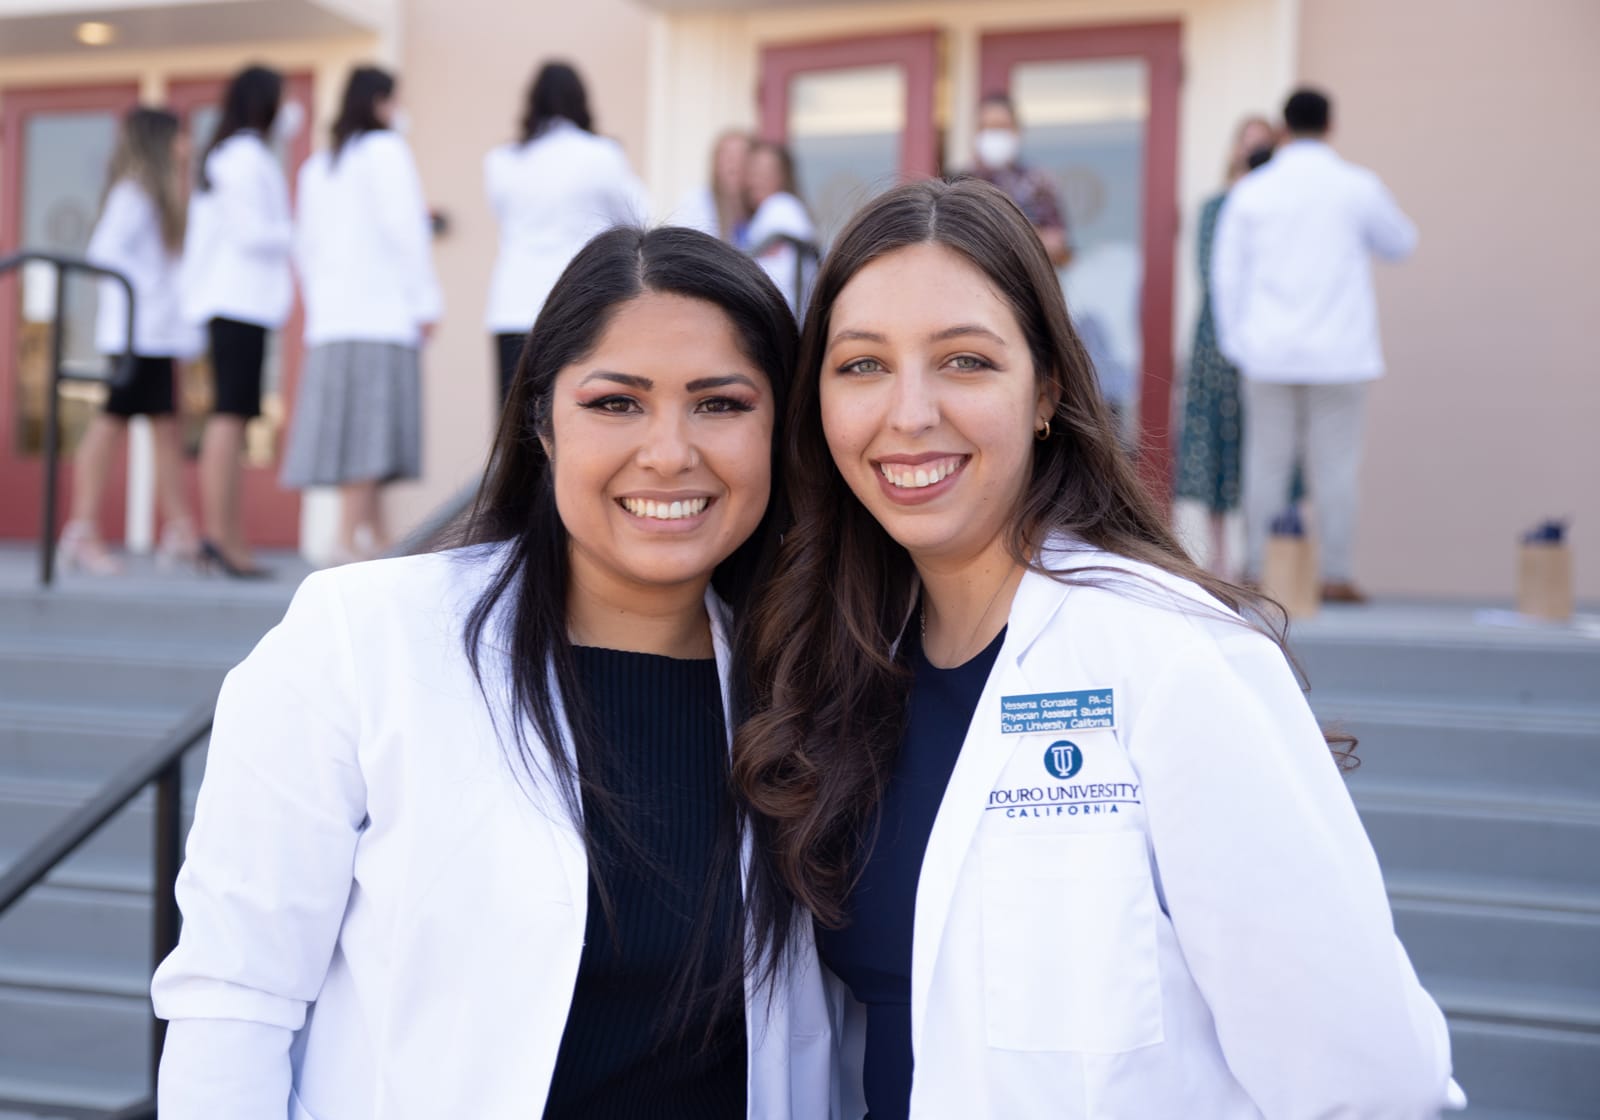 two female PA students in white coats posing outside college building